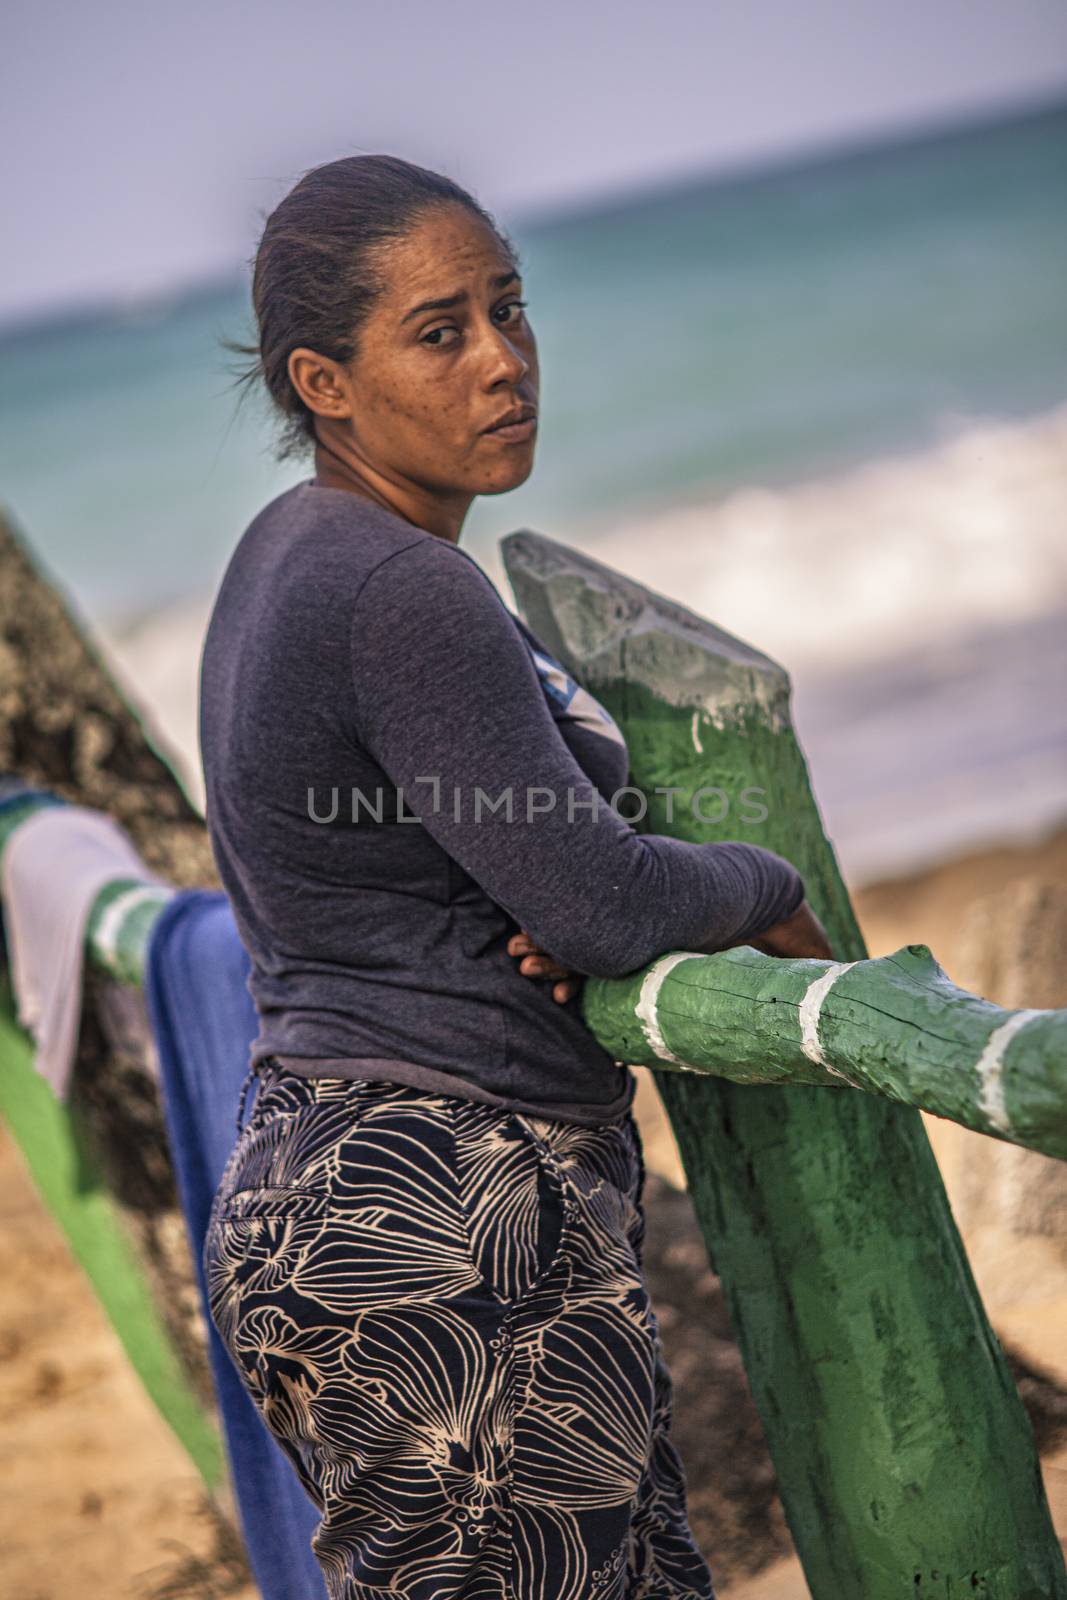 PLAYA LIMON, DOMINICAN REPUBLIC 28 DECEMBER 2019: Dominican poor woman on the beach